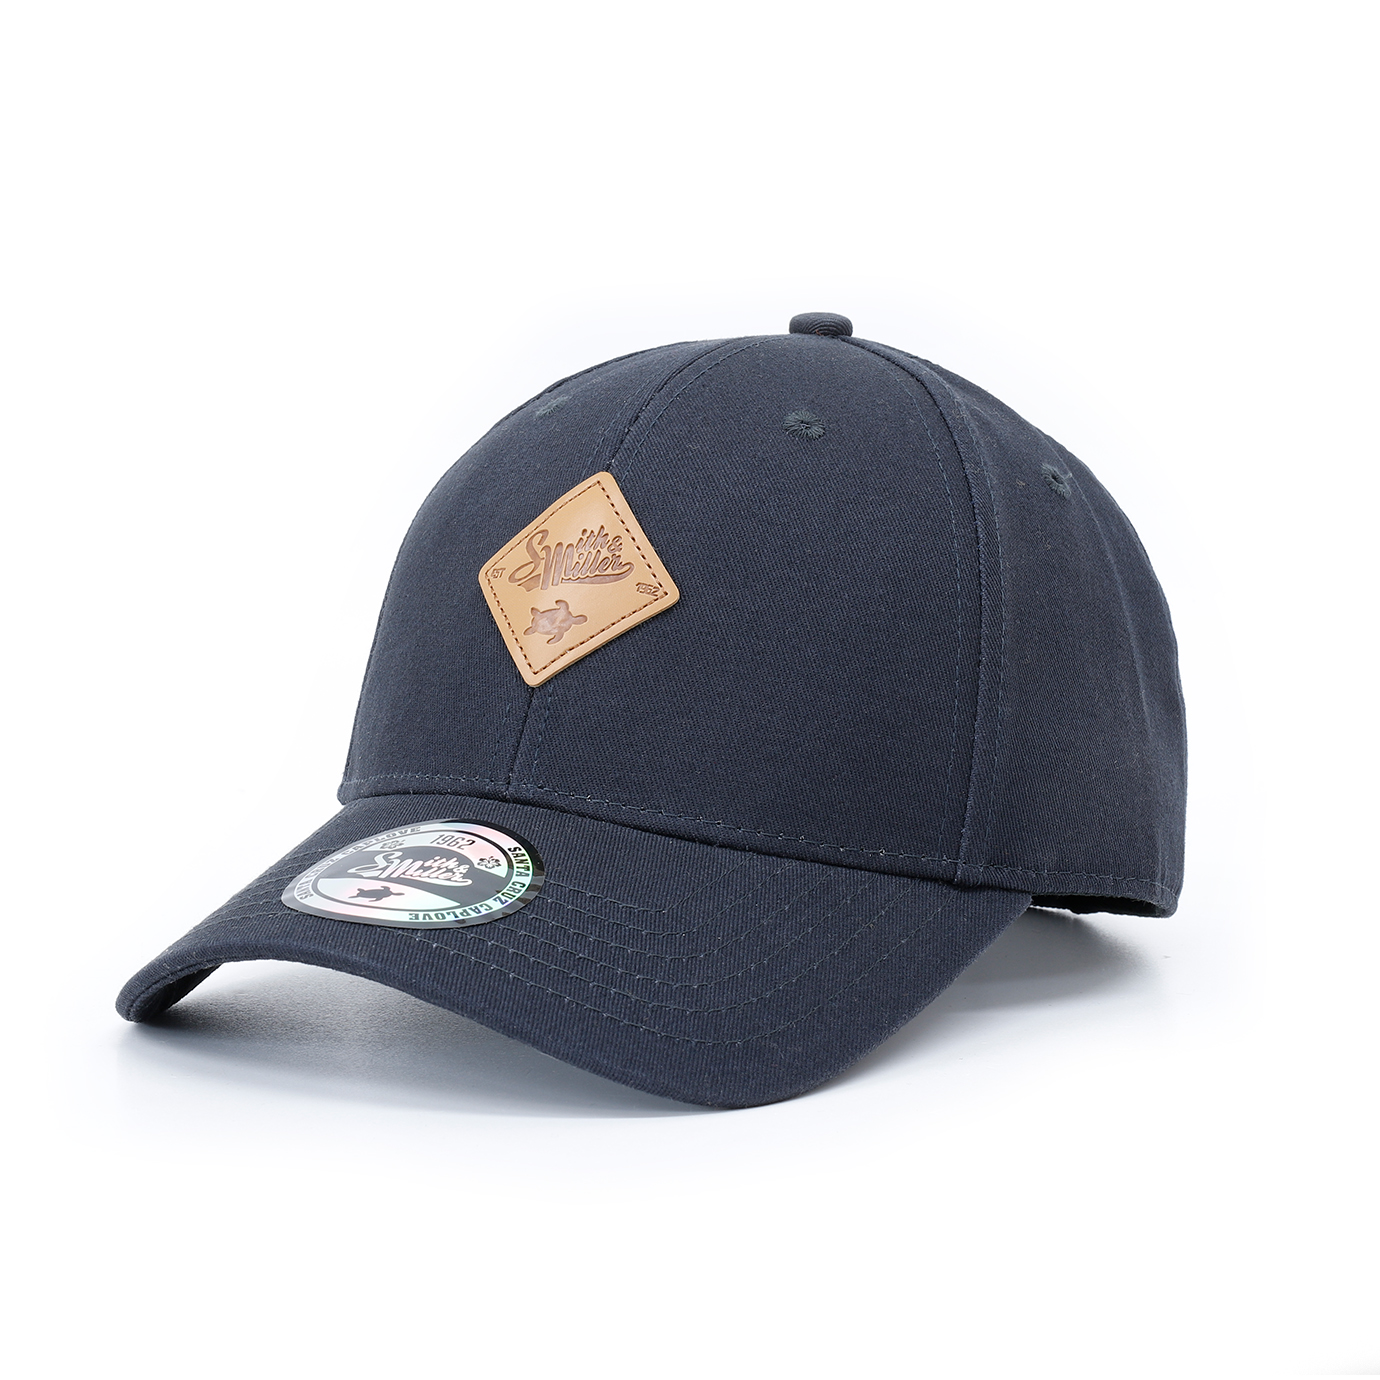 Smith & Miller Beverly Curved Cap, navy